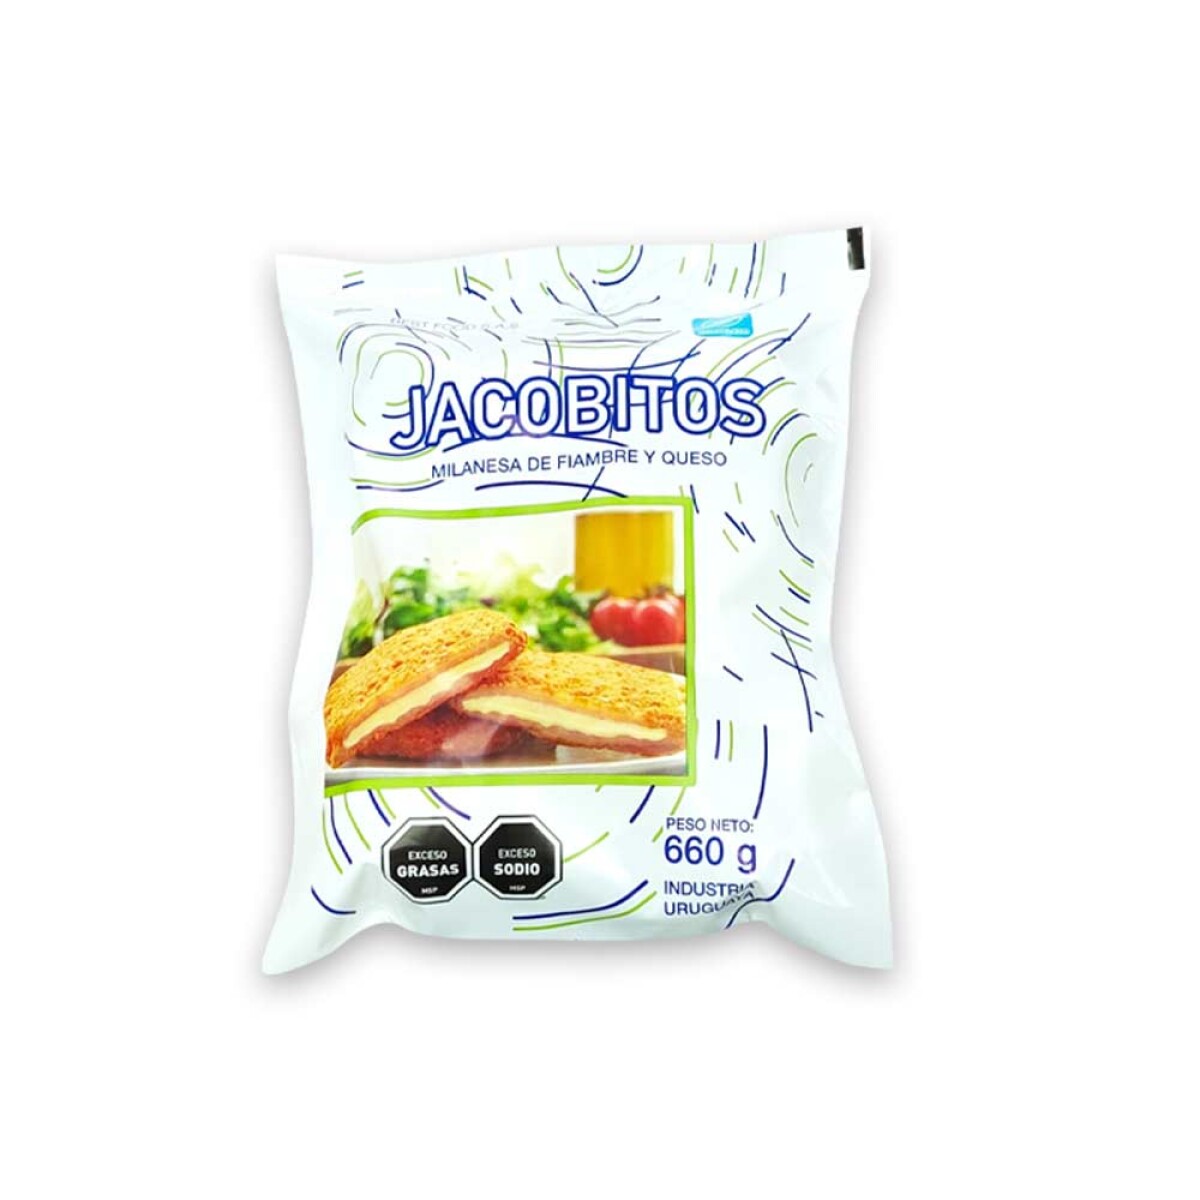 Jacobitos Jamon Y Queso 660 Grs 